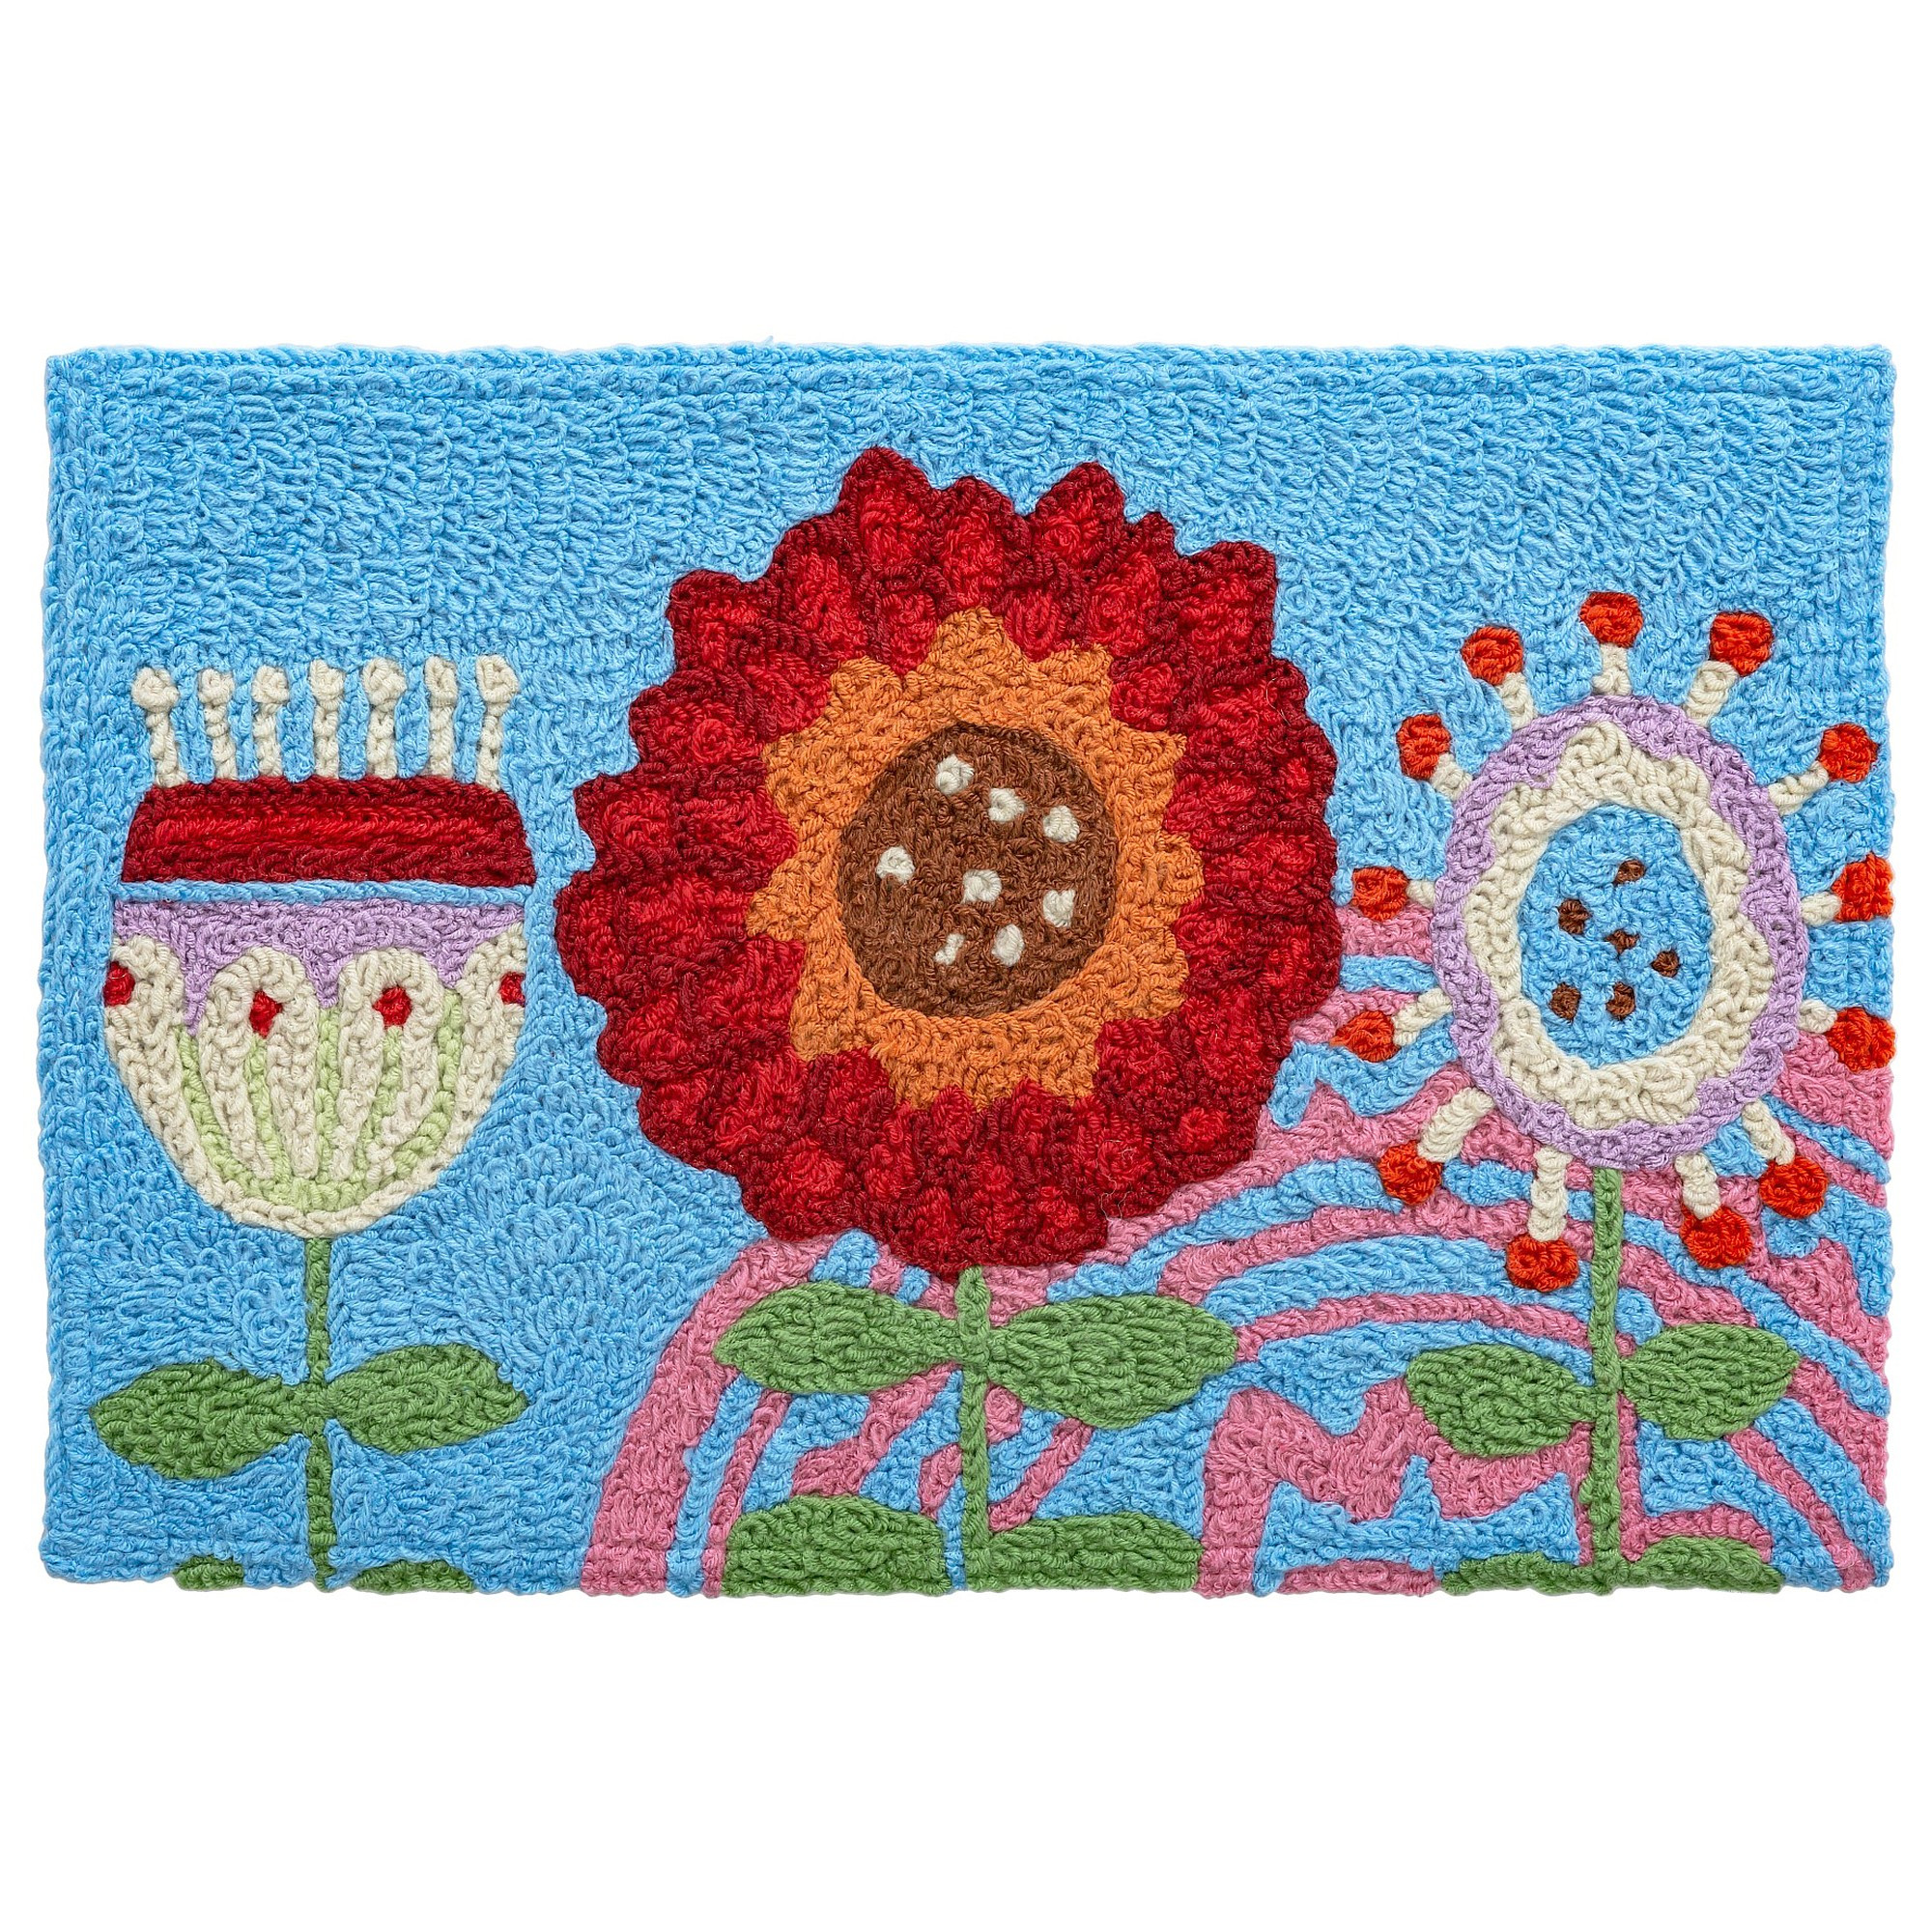 Kaleidoscope Floral Jellybean Accent Rug with Flowers 20" x 30"